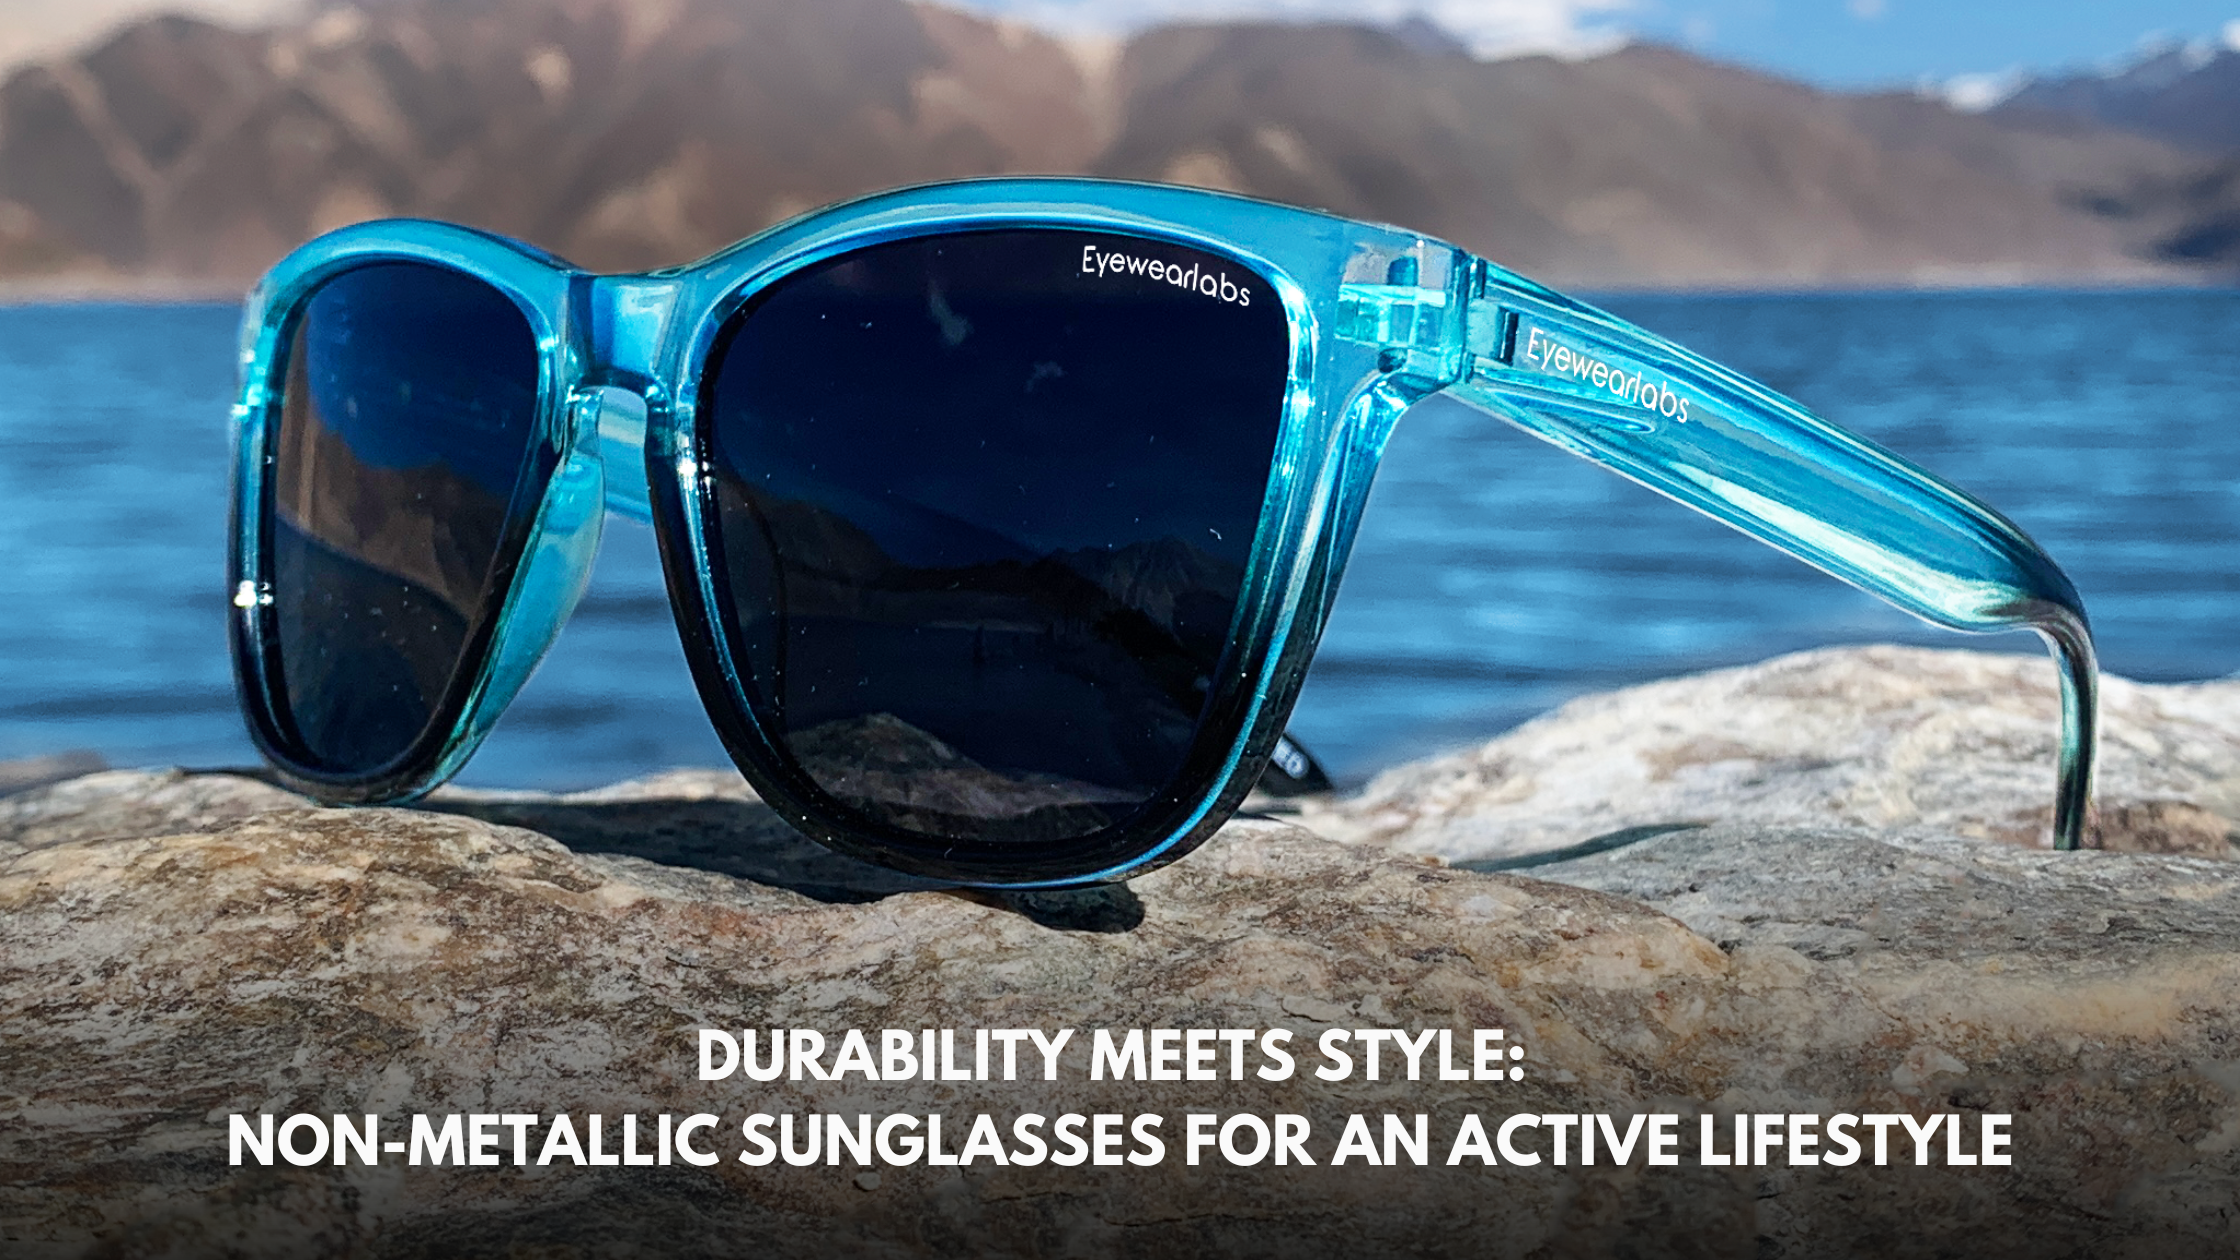 Durability Meets Style: Non-Metallic Sunglasses for an Active Lifestyle